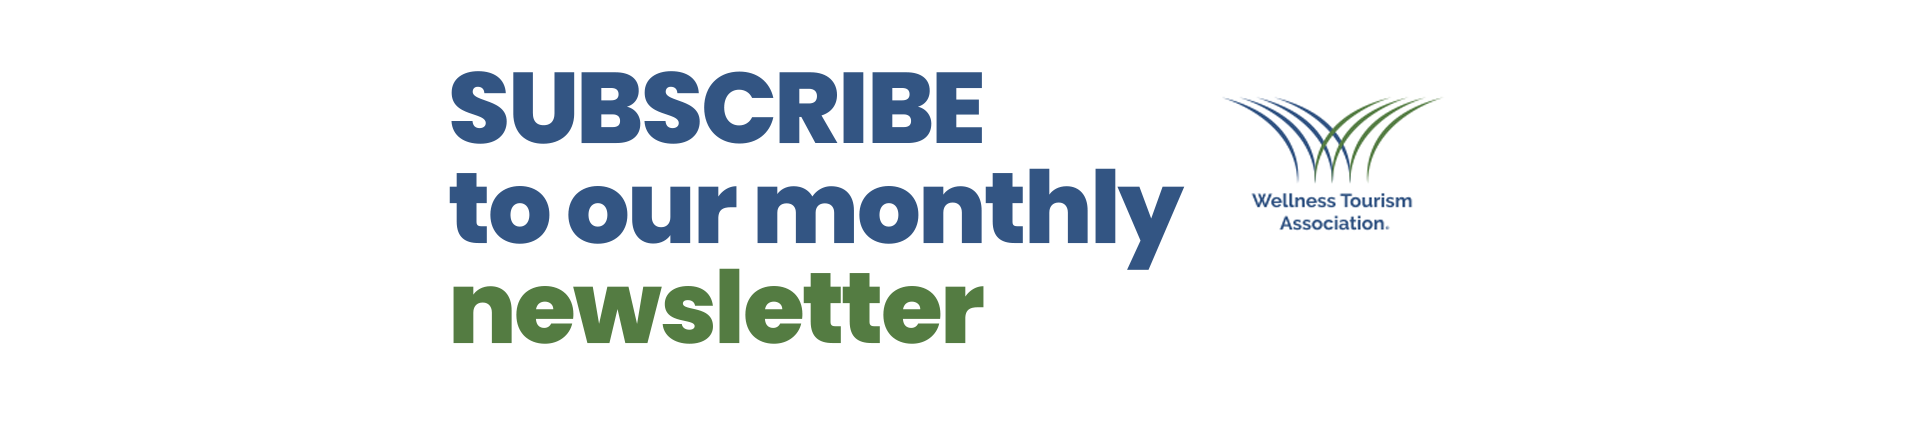 Subscribe to our monthly newsletter button